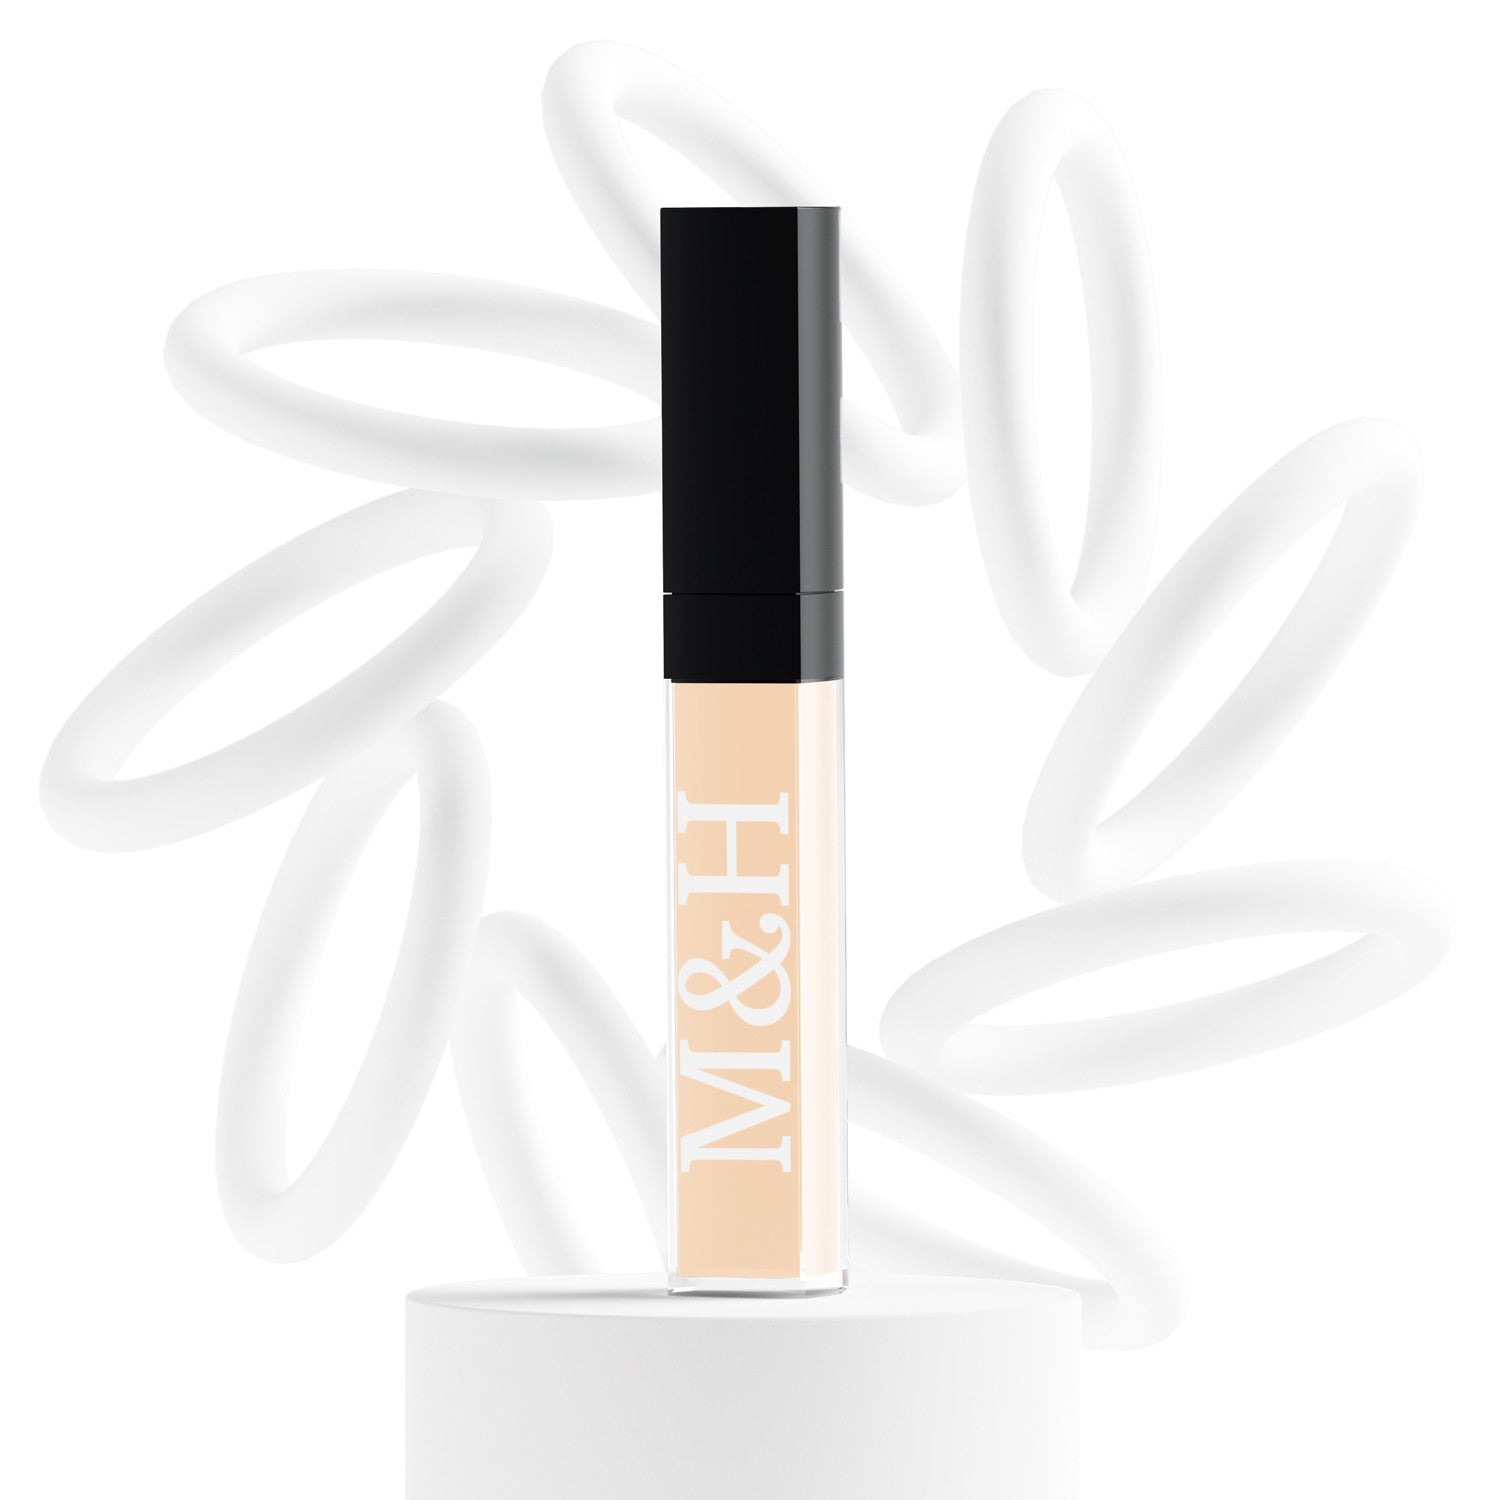 Warm-tone concealersM&H Fashionconcealer-warmM&H Fashion
This multifunctional concealer is designed to cover under-eye circles, complexion alterations, and major imperfections like scars, hyperpigmentation, burns, and tatWarm-tone concealers